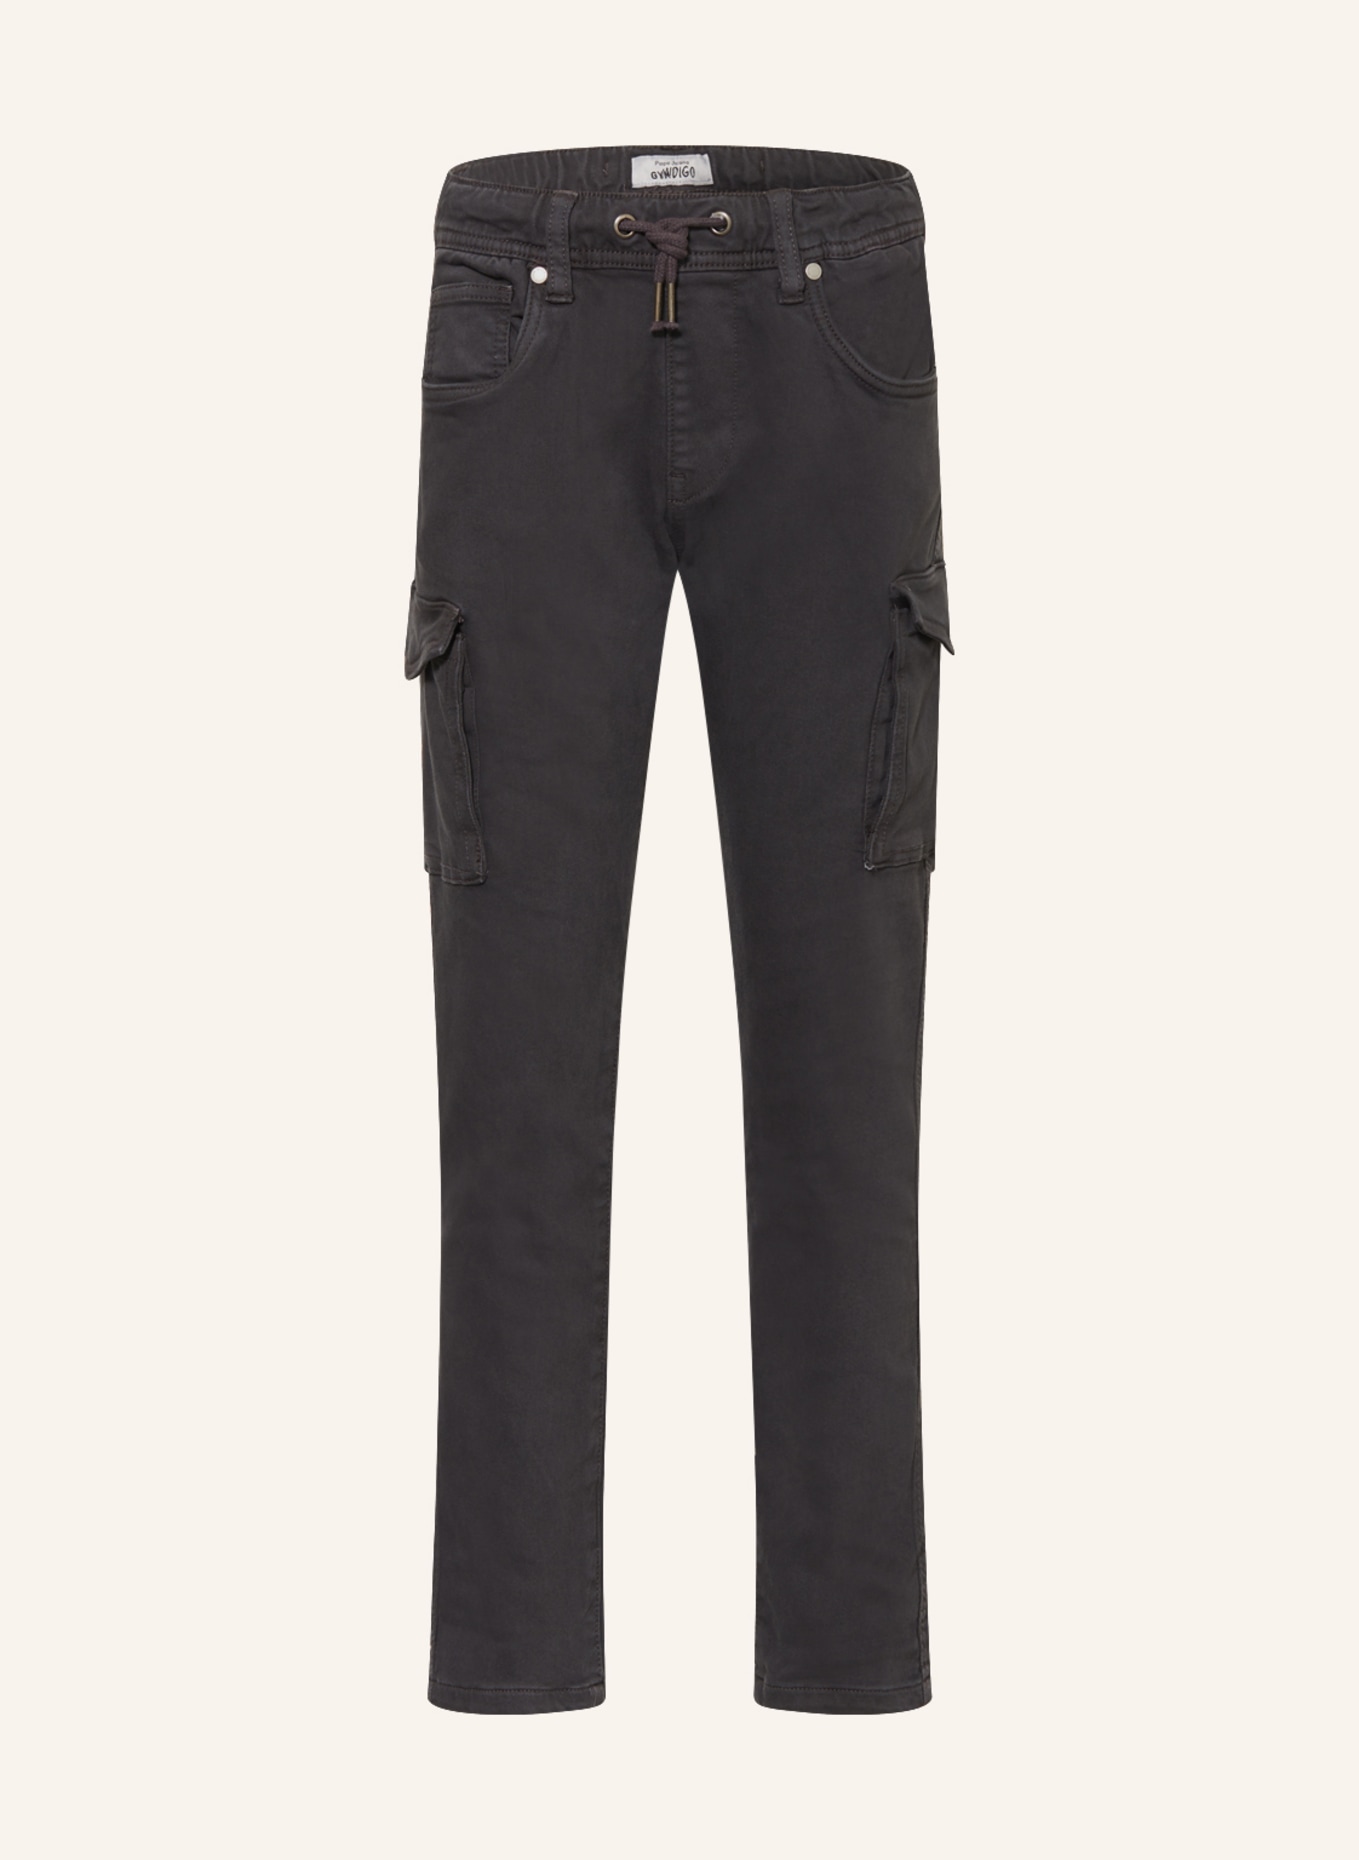 Cargohose CHARGO schwarz CHASE in Jeans Pepe